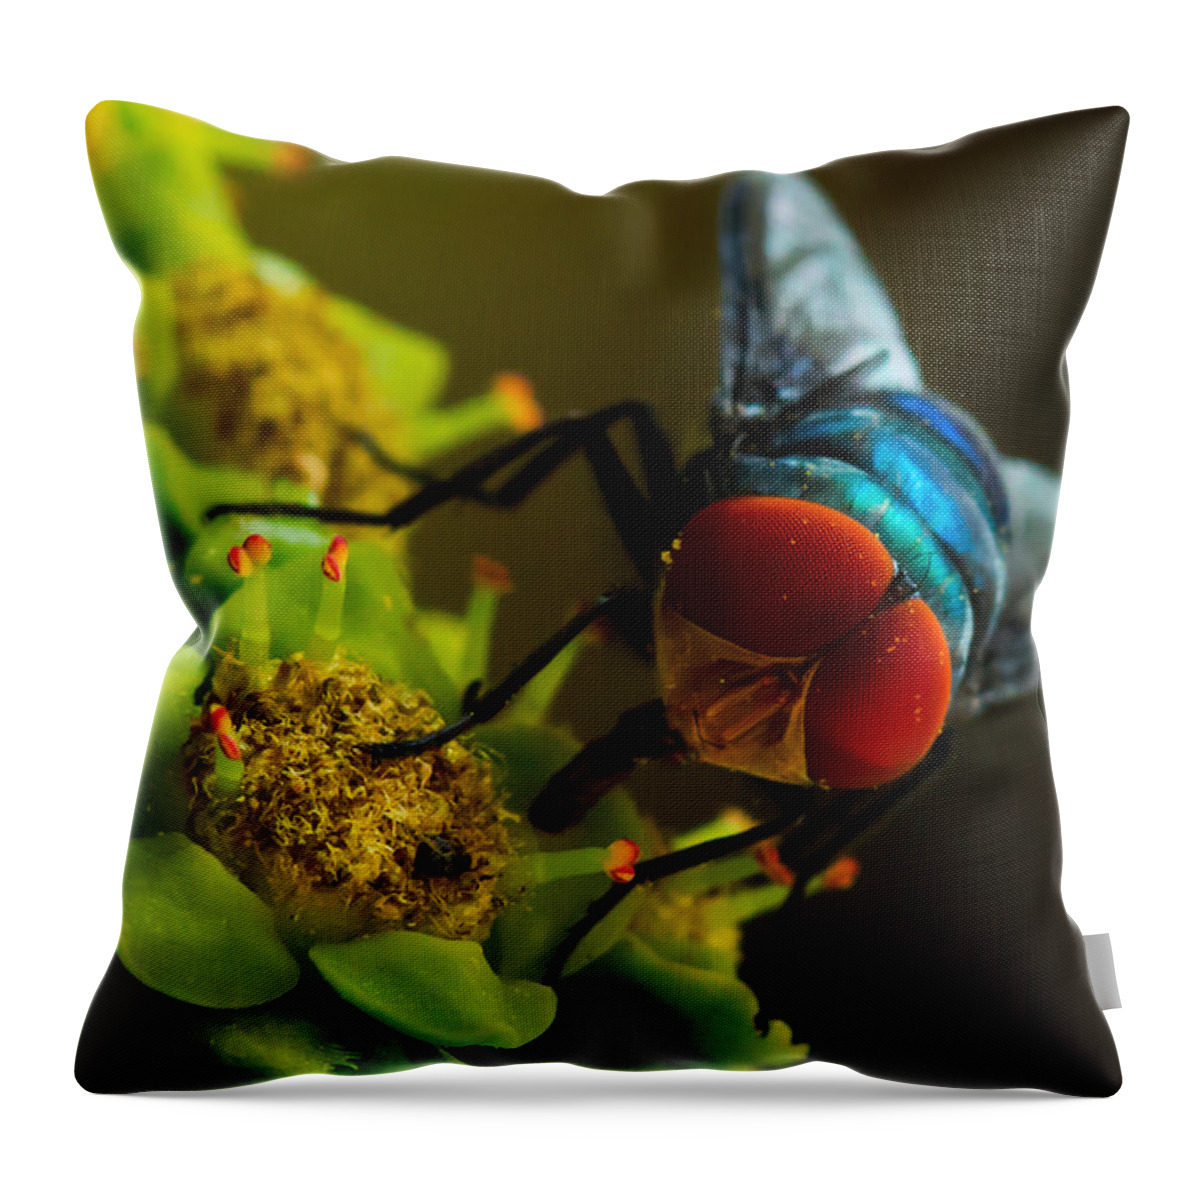 Compound Eye Throw Pillow featuring the photograph Compound Eye Of Fly - Macro by Ramabhadran Thirupattur